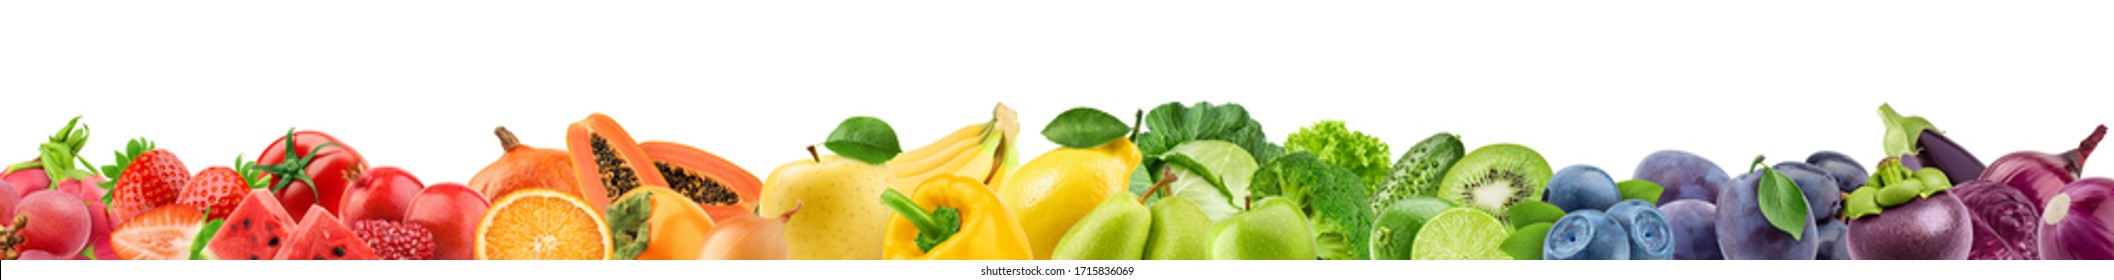 Collage of fresh color fruits, healthy food concept